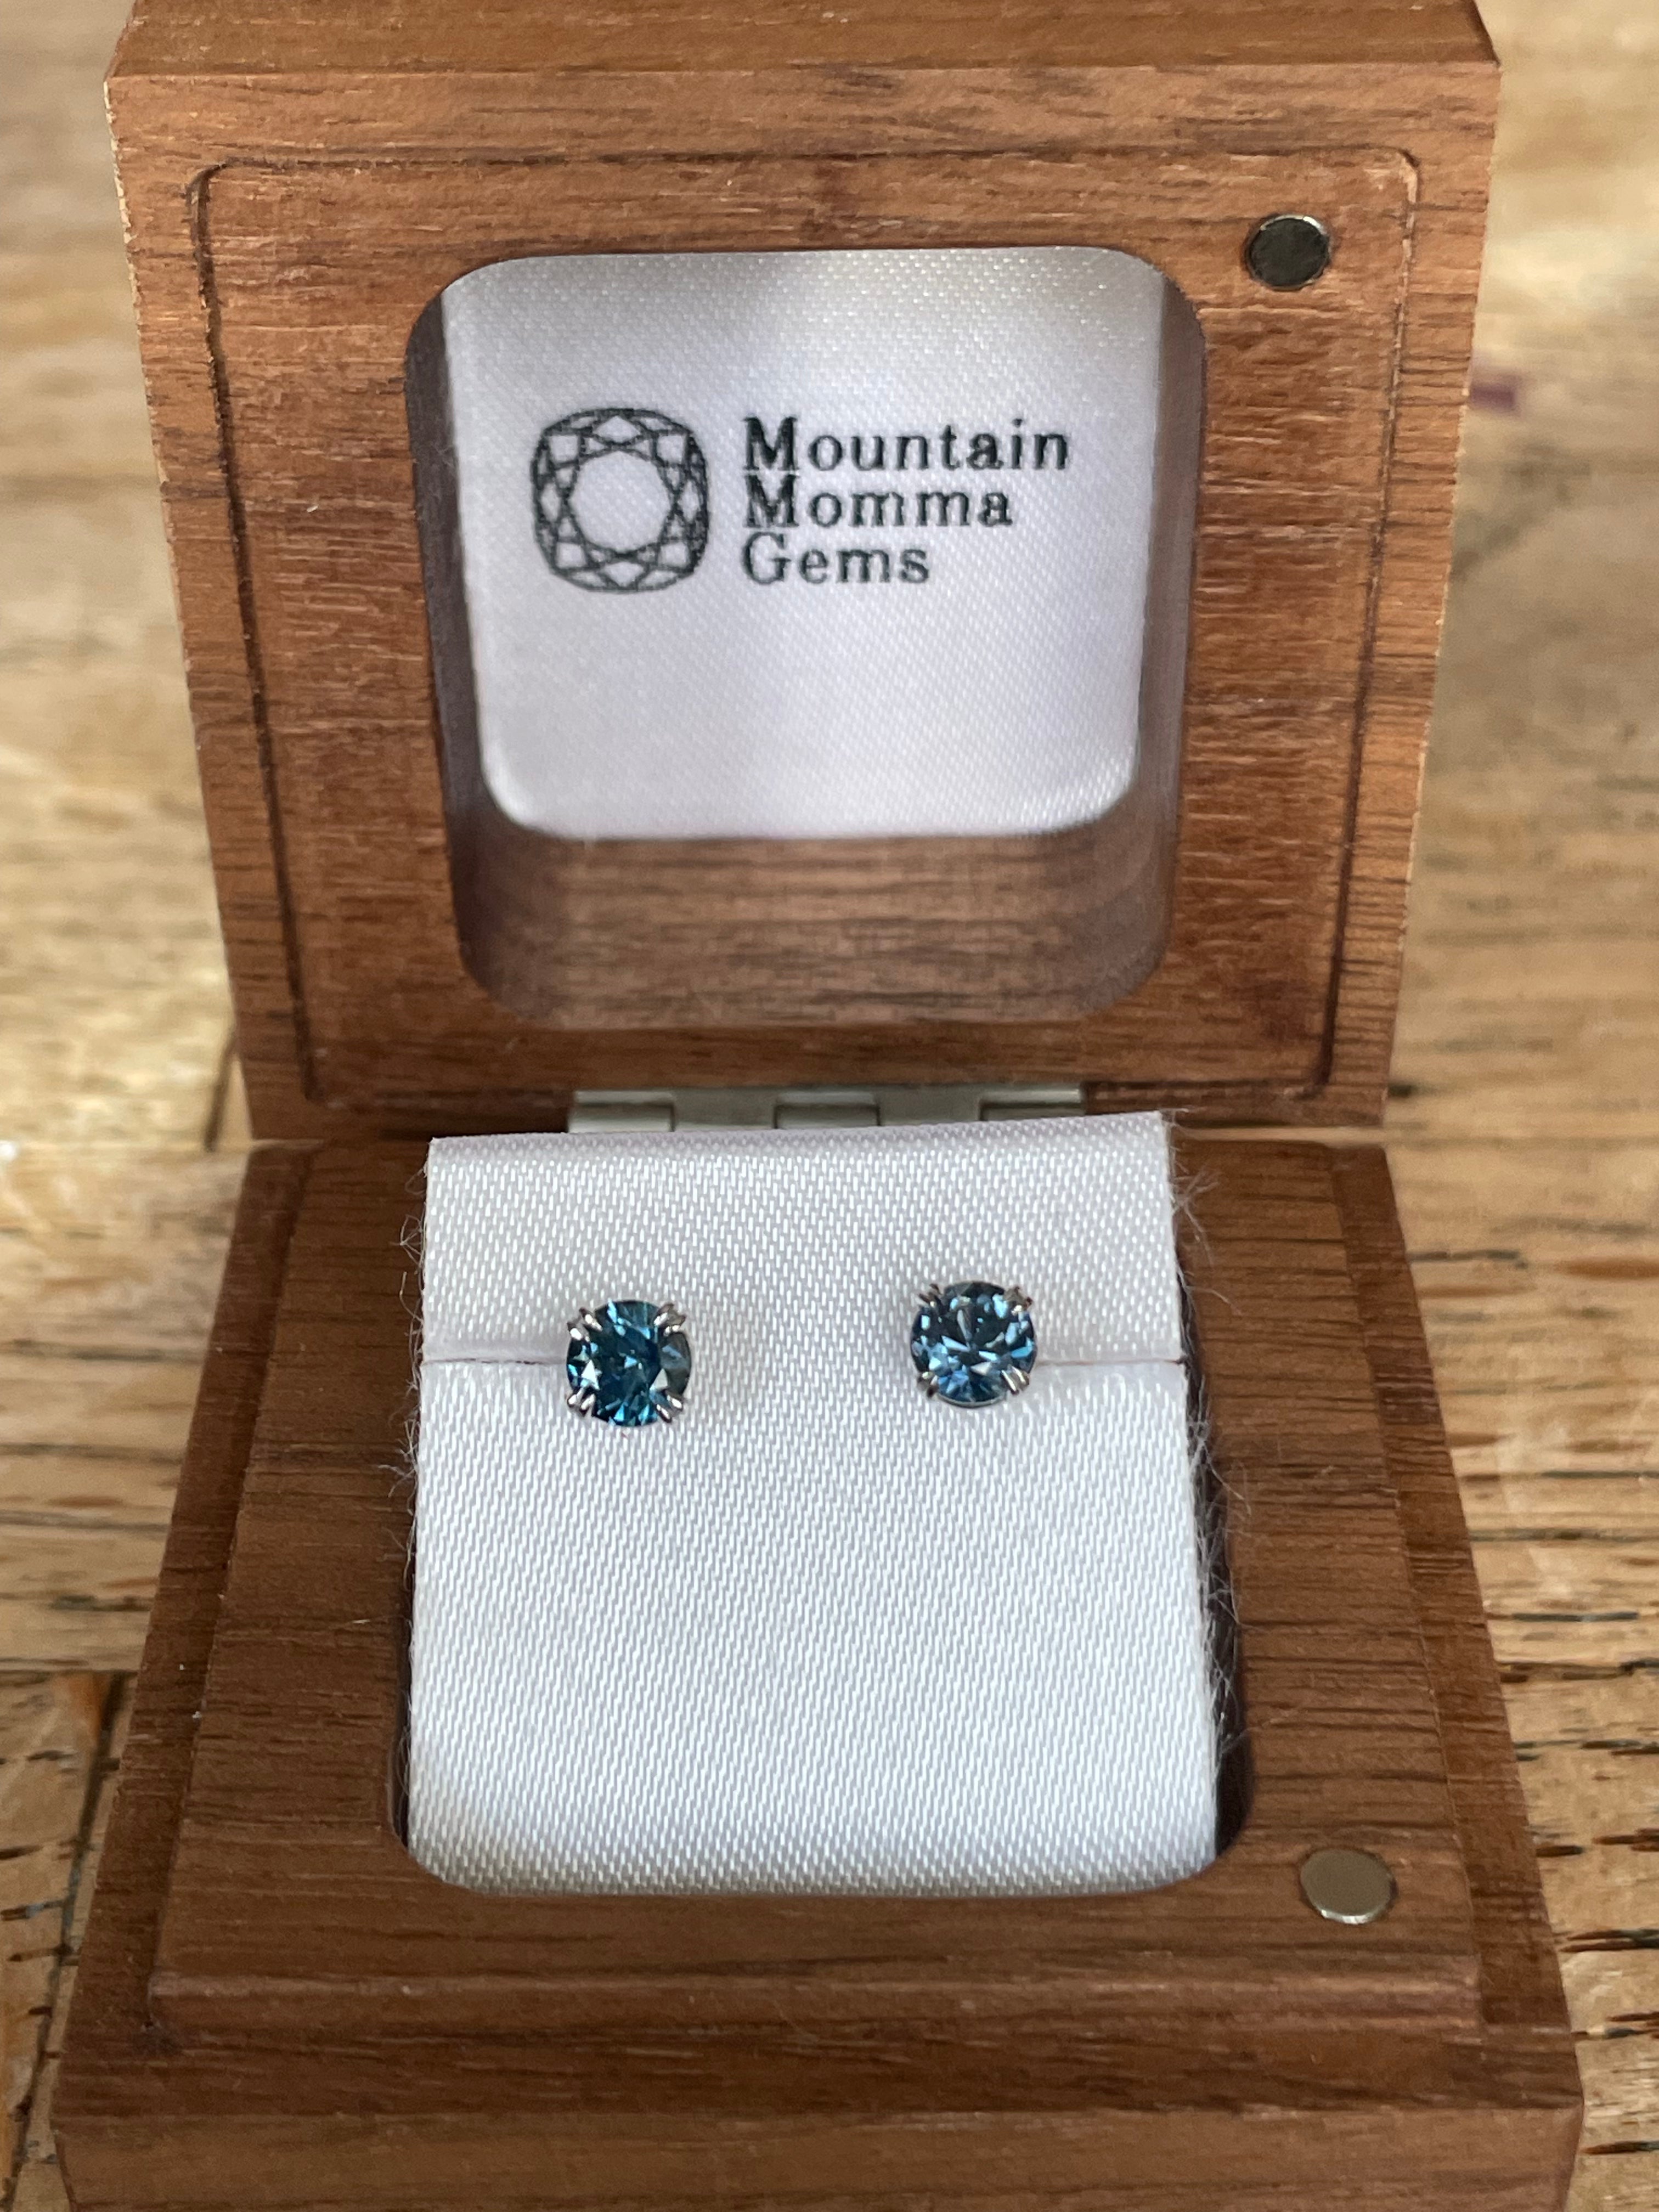 Montana Sapphire Blue Round Double Claw Prong Stud Earrings .88 ctw 14k White Gold